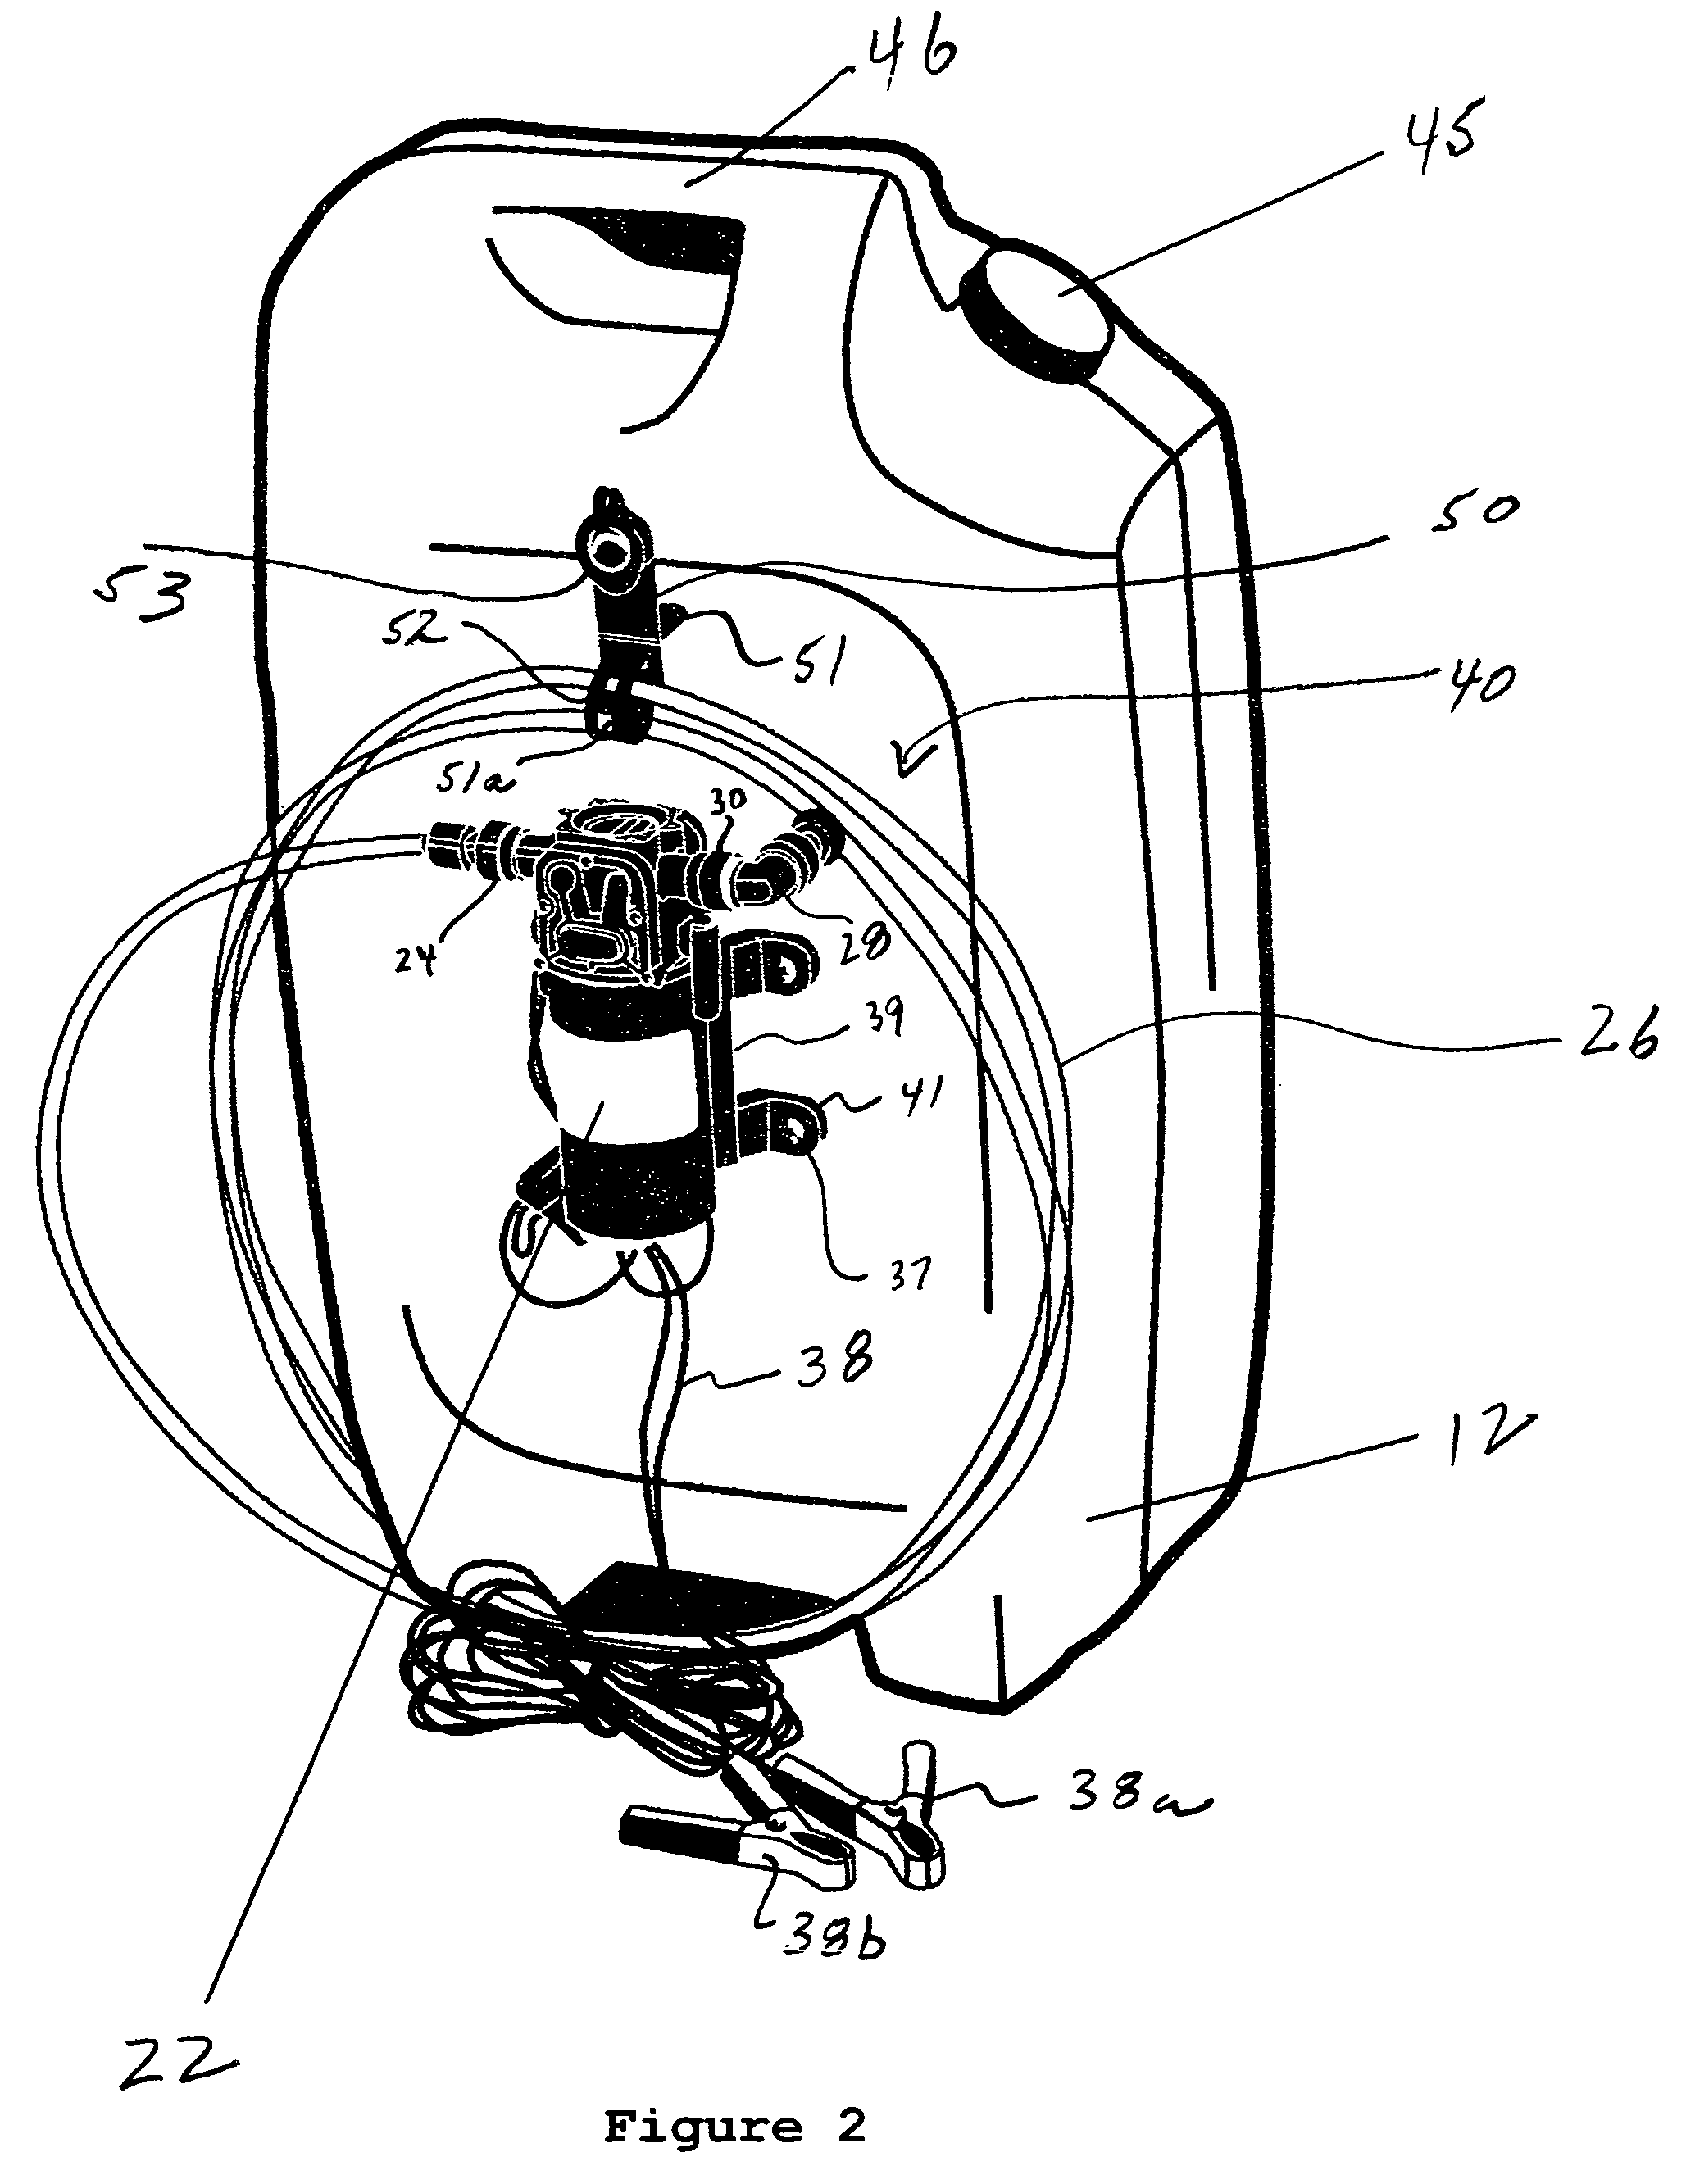 Portable self-contained fluid system